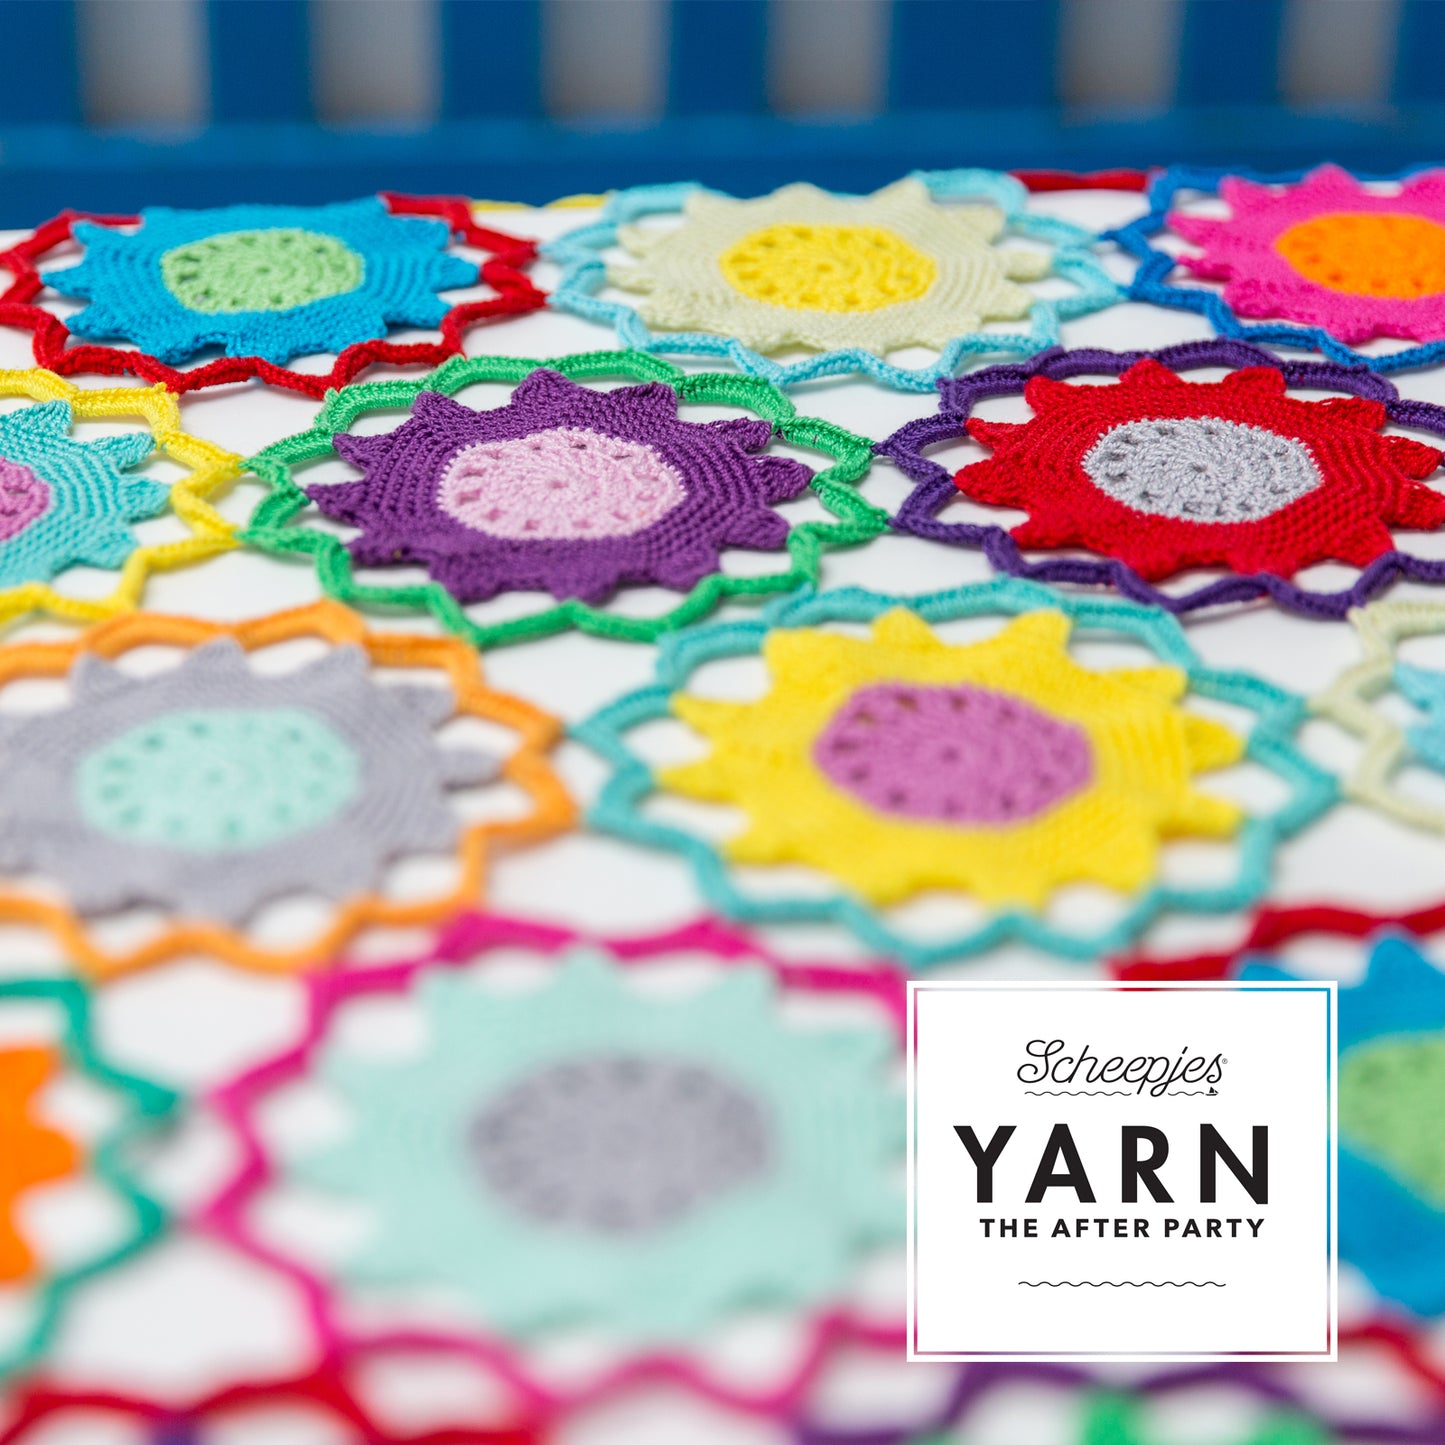 Scheepjes Yarn The After Party no. 11 - Garden Room Tablecloth (booklet) - (Crochet)